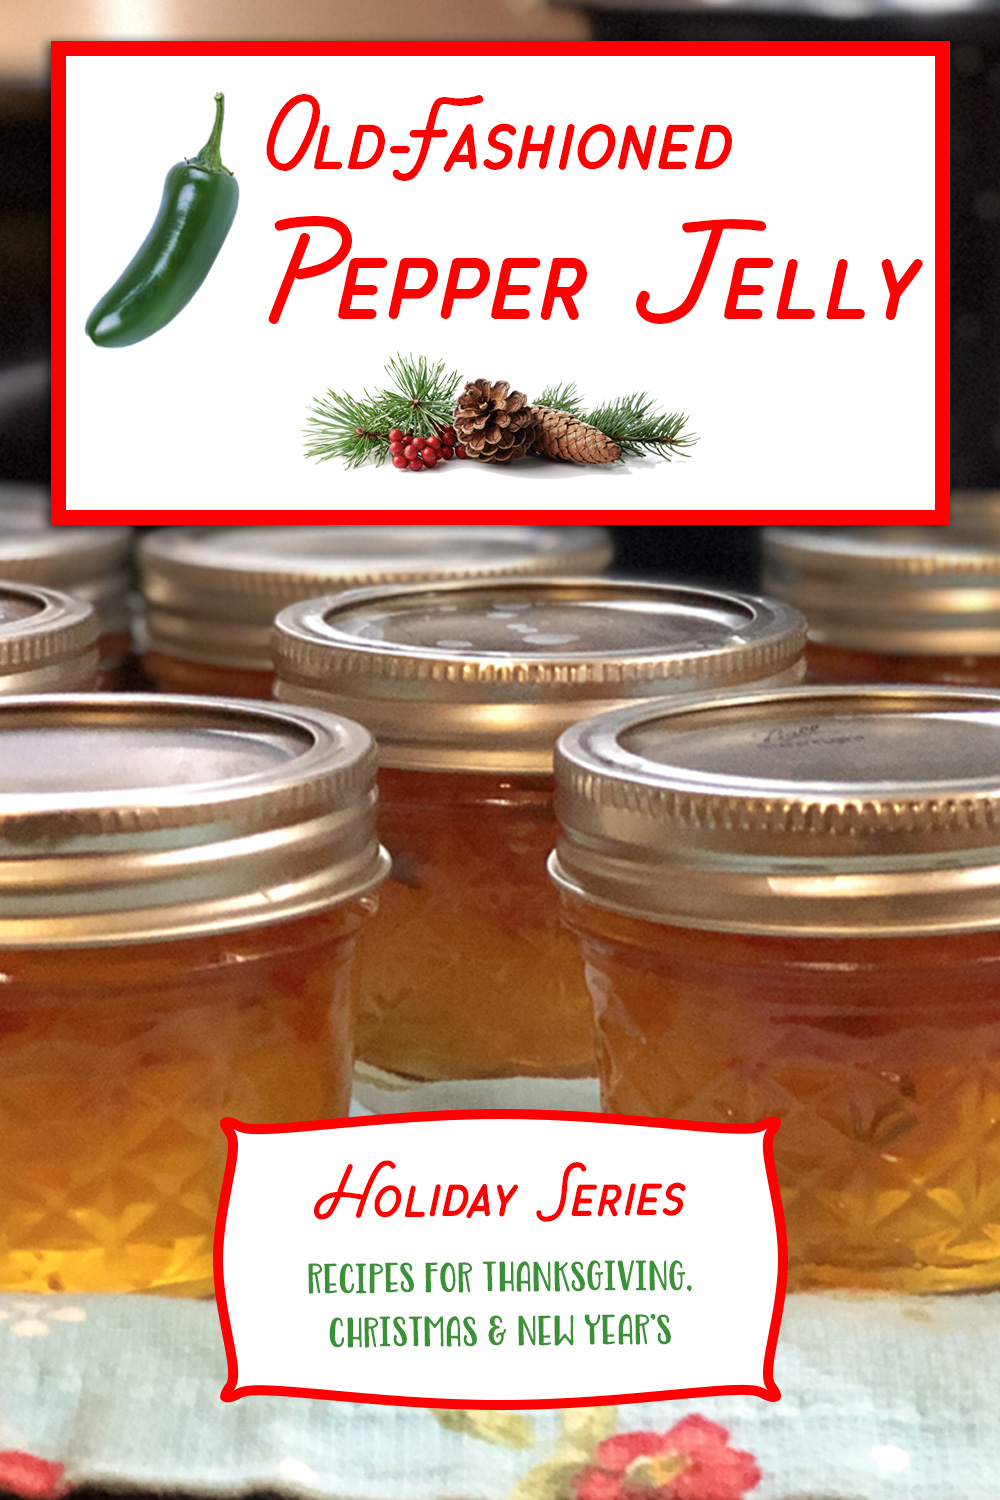 Hot Pepper Jelly – Great with cream cheese & Ritz Crackers at Christmas or New Year’s!